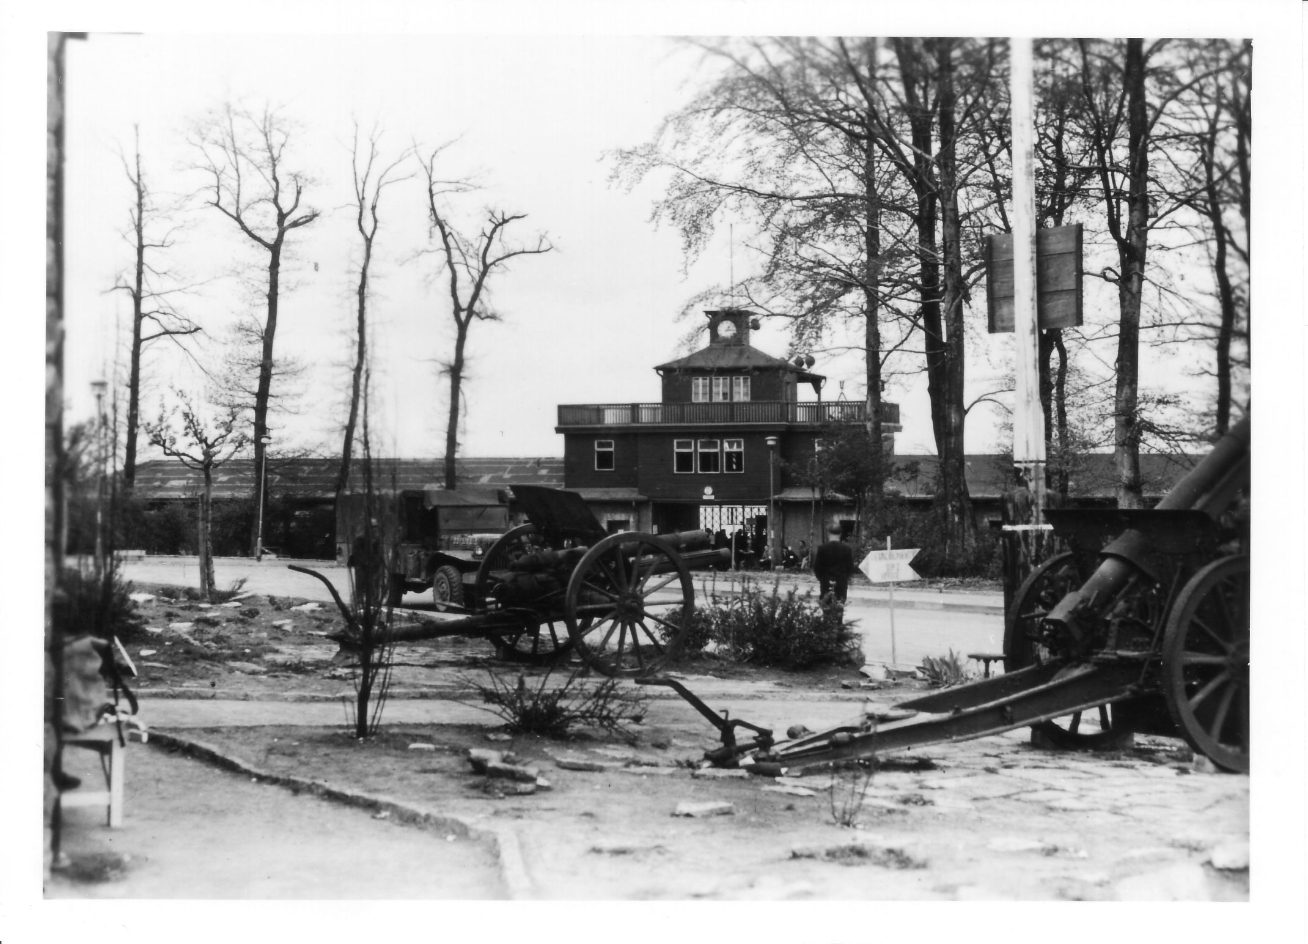 Two artillery pieces. In the background is the gate building. A small crowd is gathered in front of it. The gate is open.